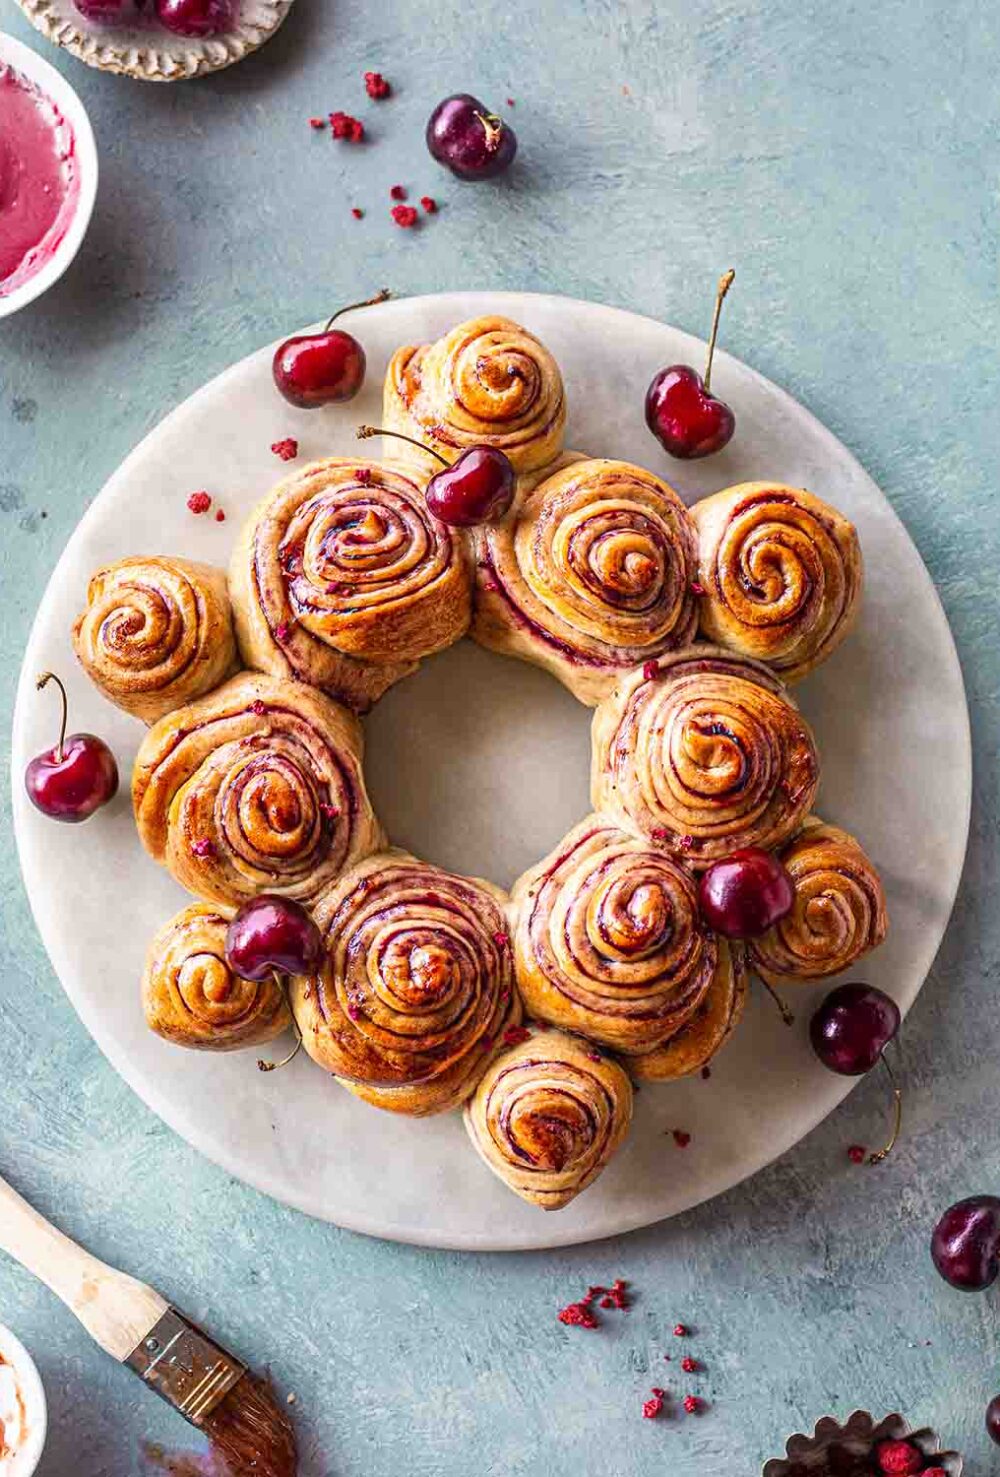 Cherry rolls shaped in a wreath on a marble serving platter. The wreath is surrounded by fresh cherries and condiments.